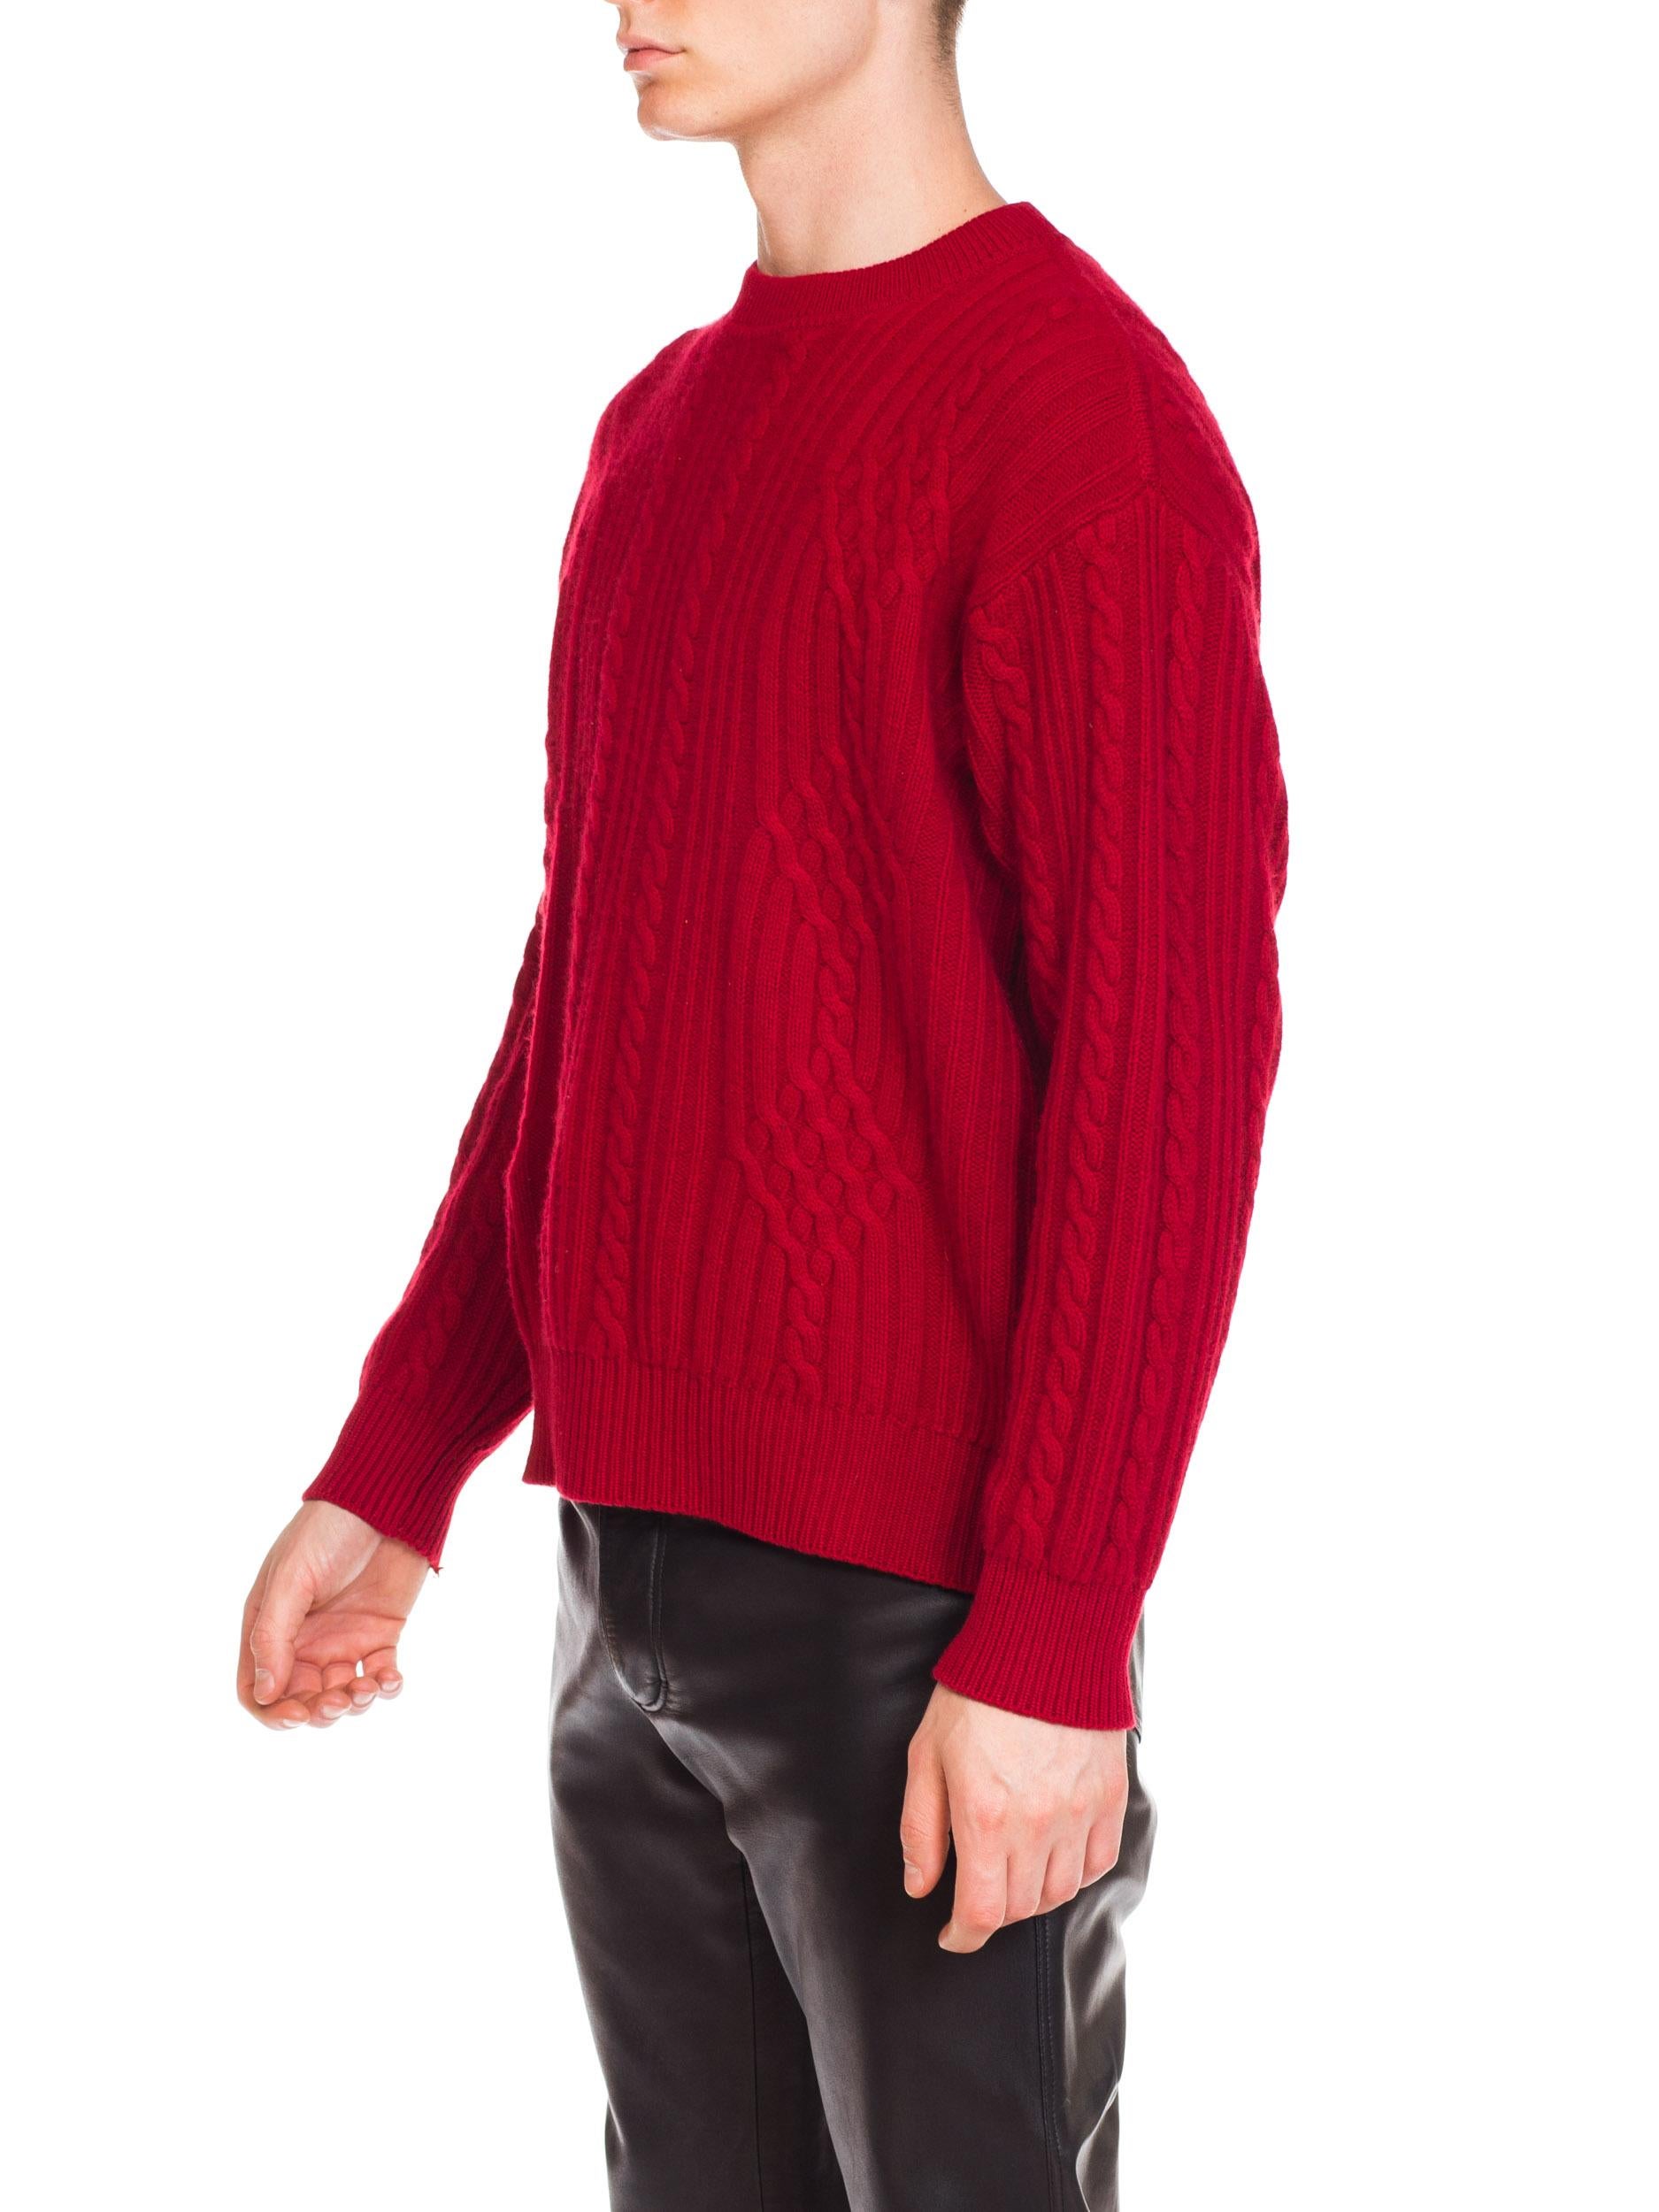 Red 1980s Gucci Men's Cashmere Sweater